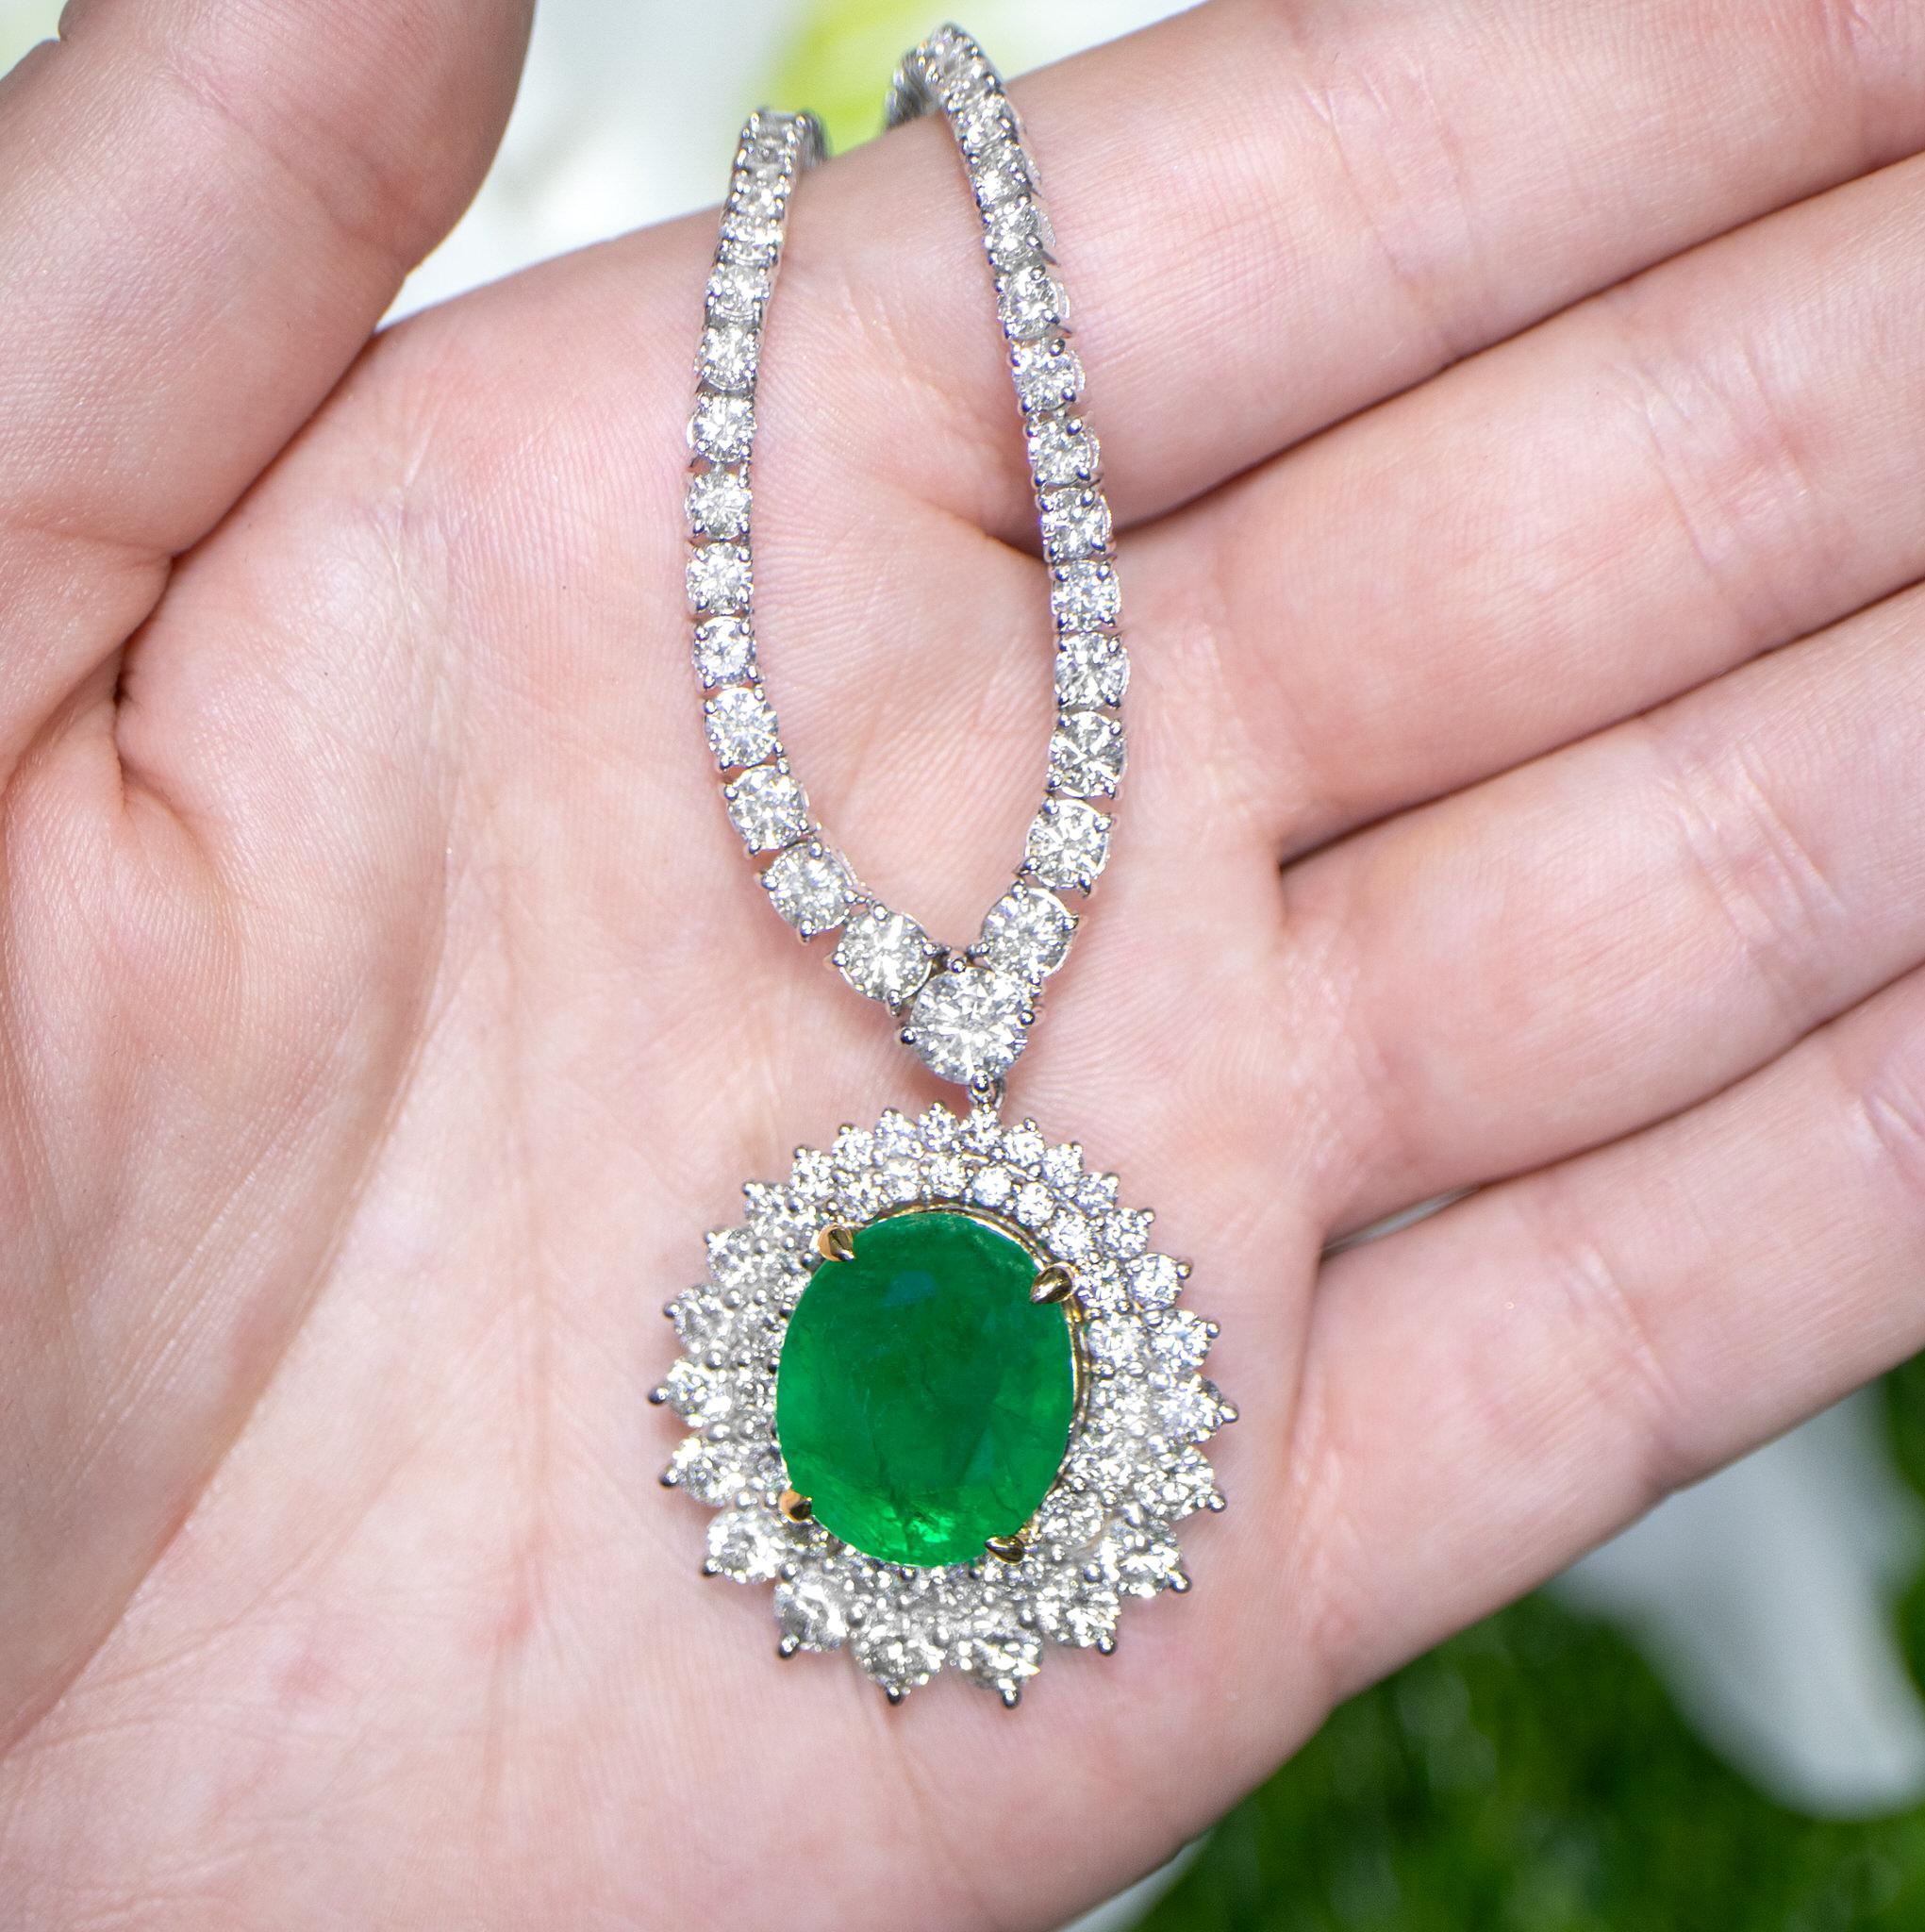 Oval Cut Important Emerald Pendant Necklace With Diamonds 20 Carats 18K White Gold For Sale